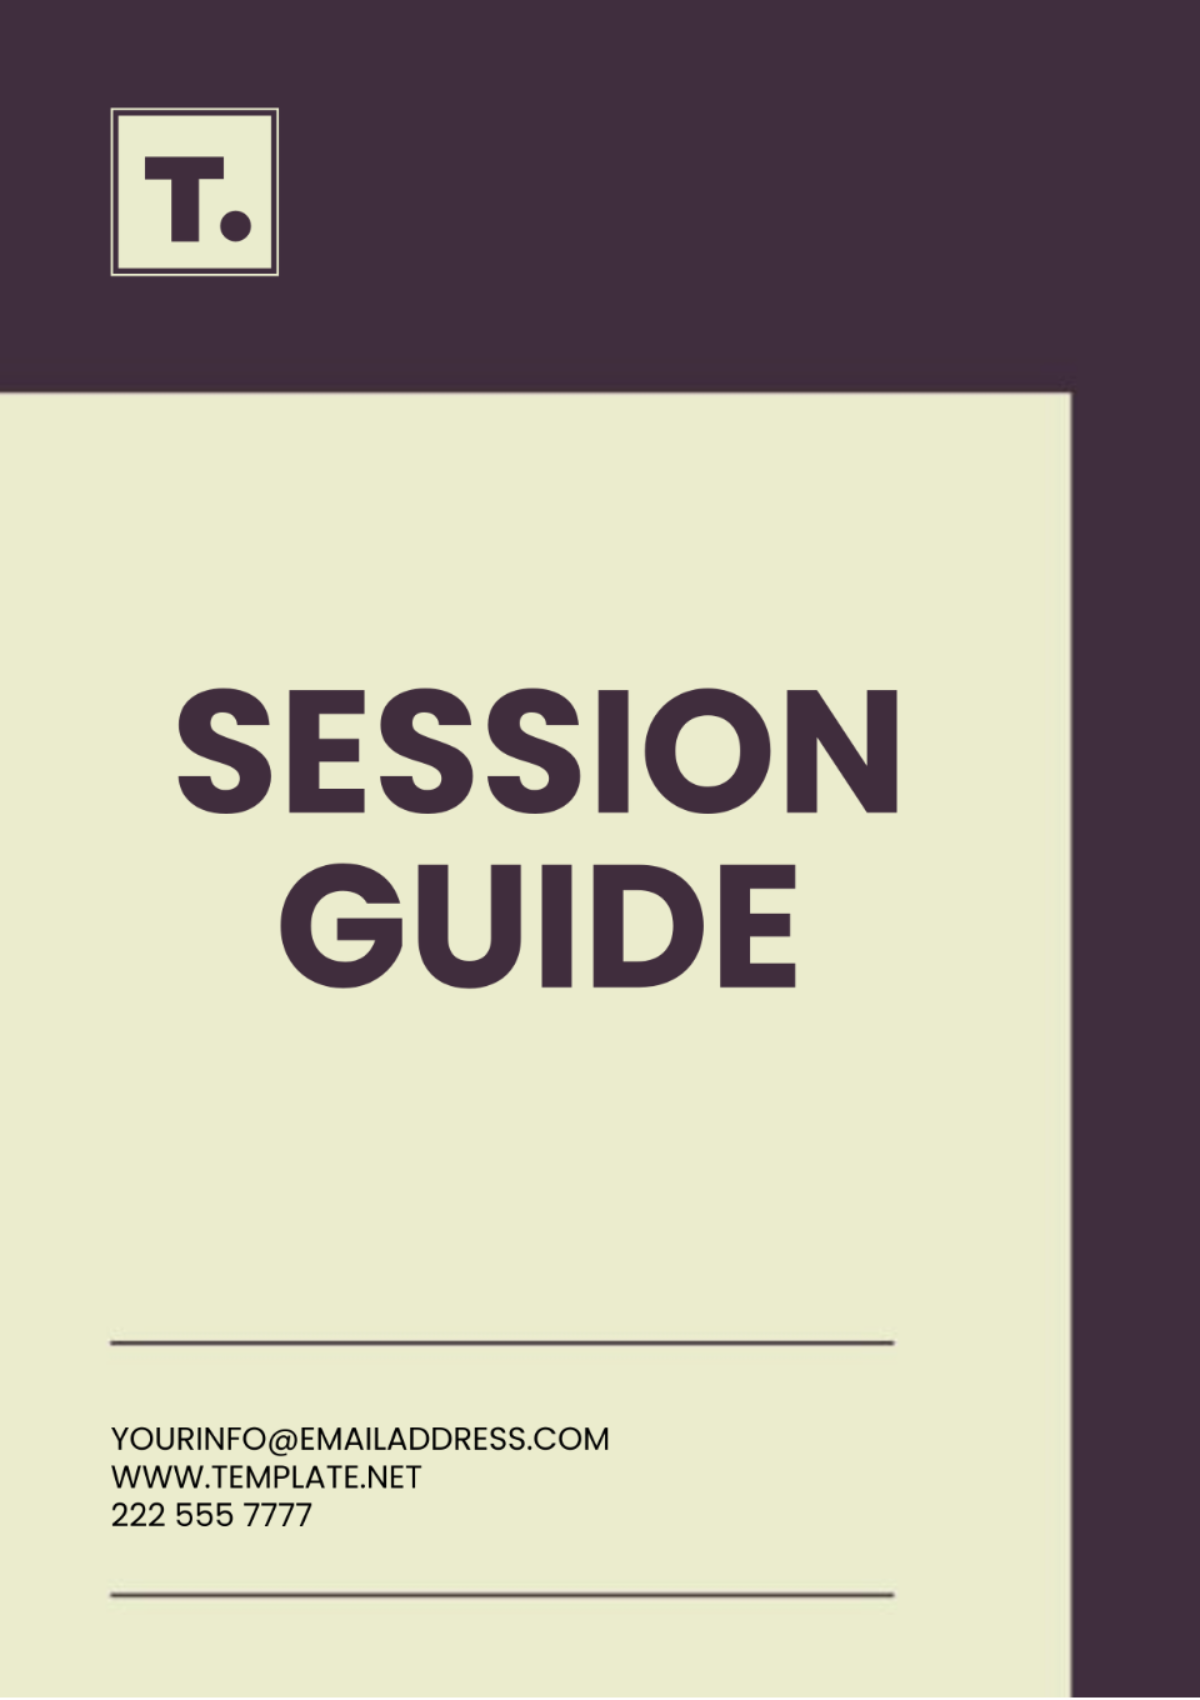 Free Session Guide Template